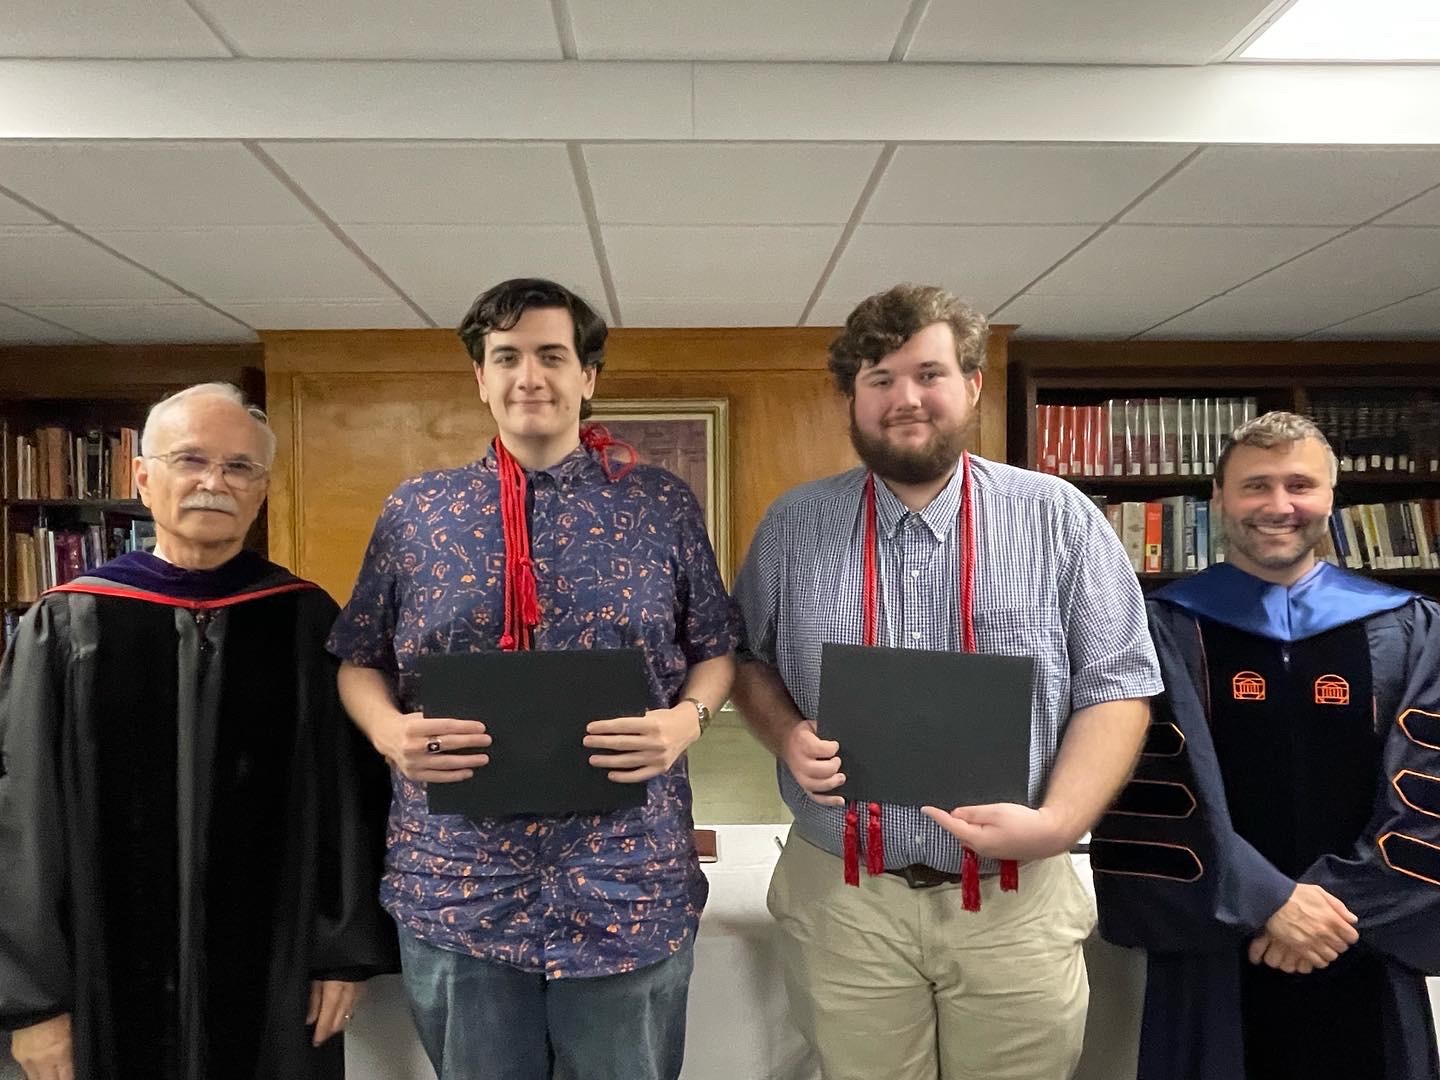 two students being inducted alongside two professors